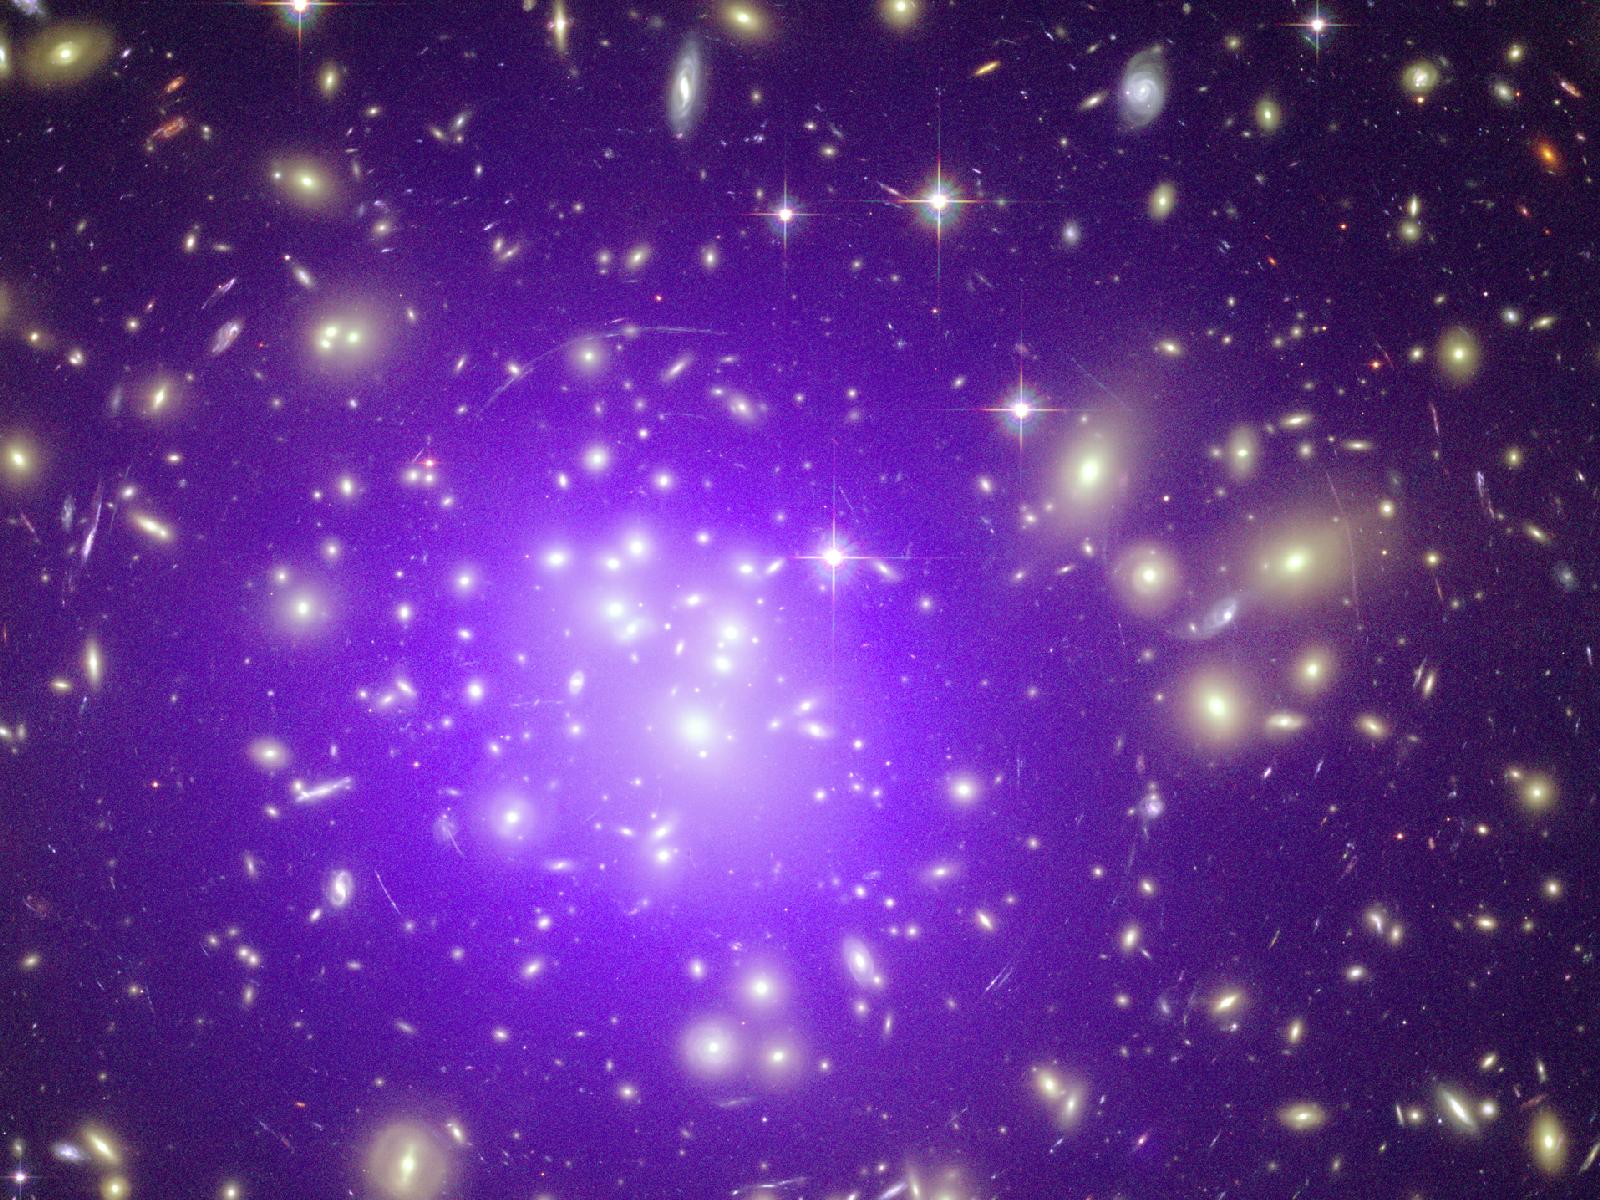 Space Purple Haze In Abell Massive Cluster Of